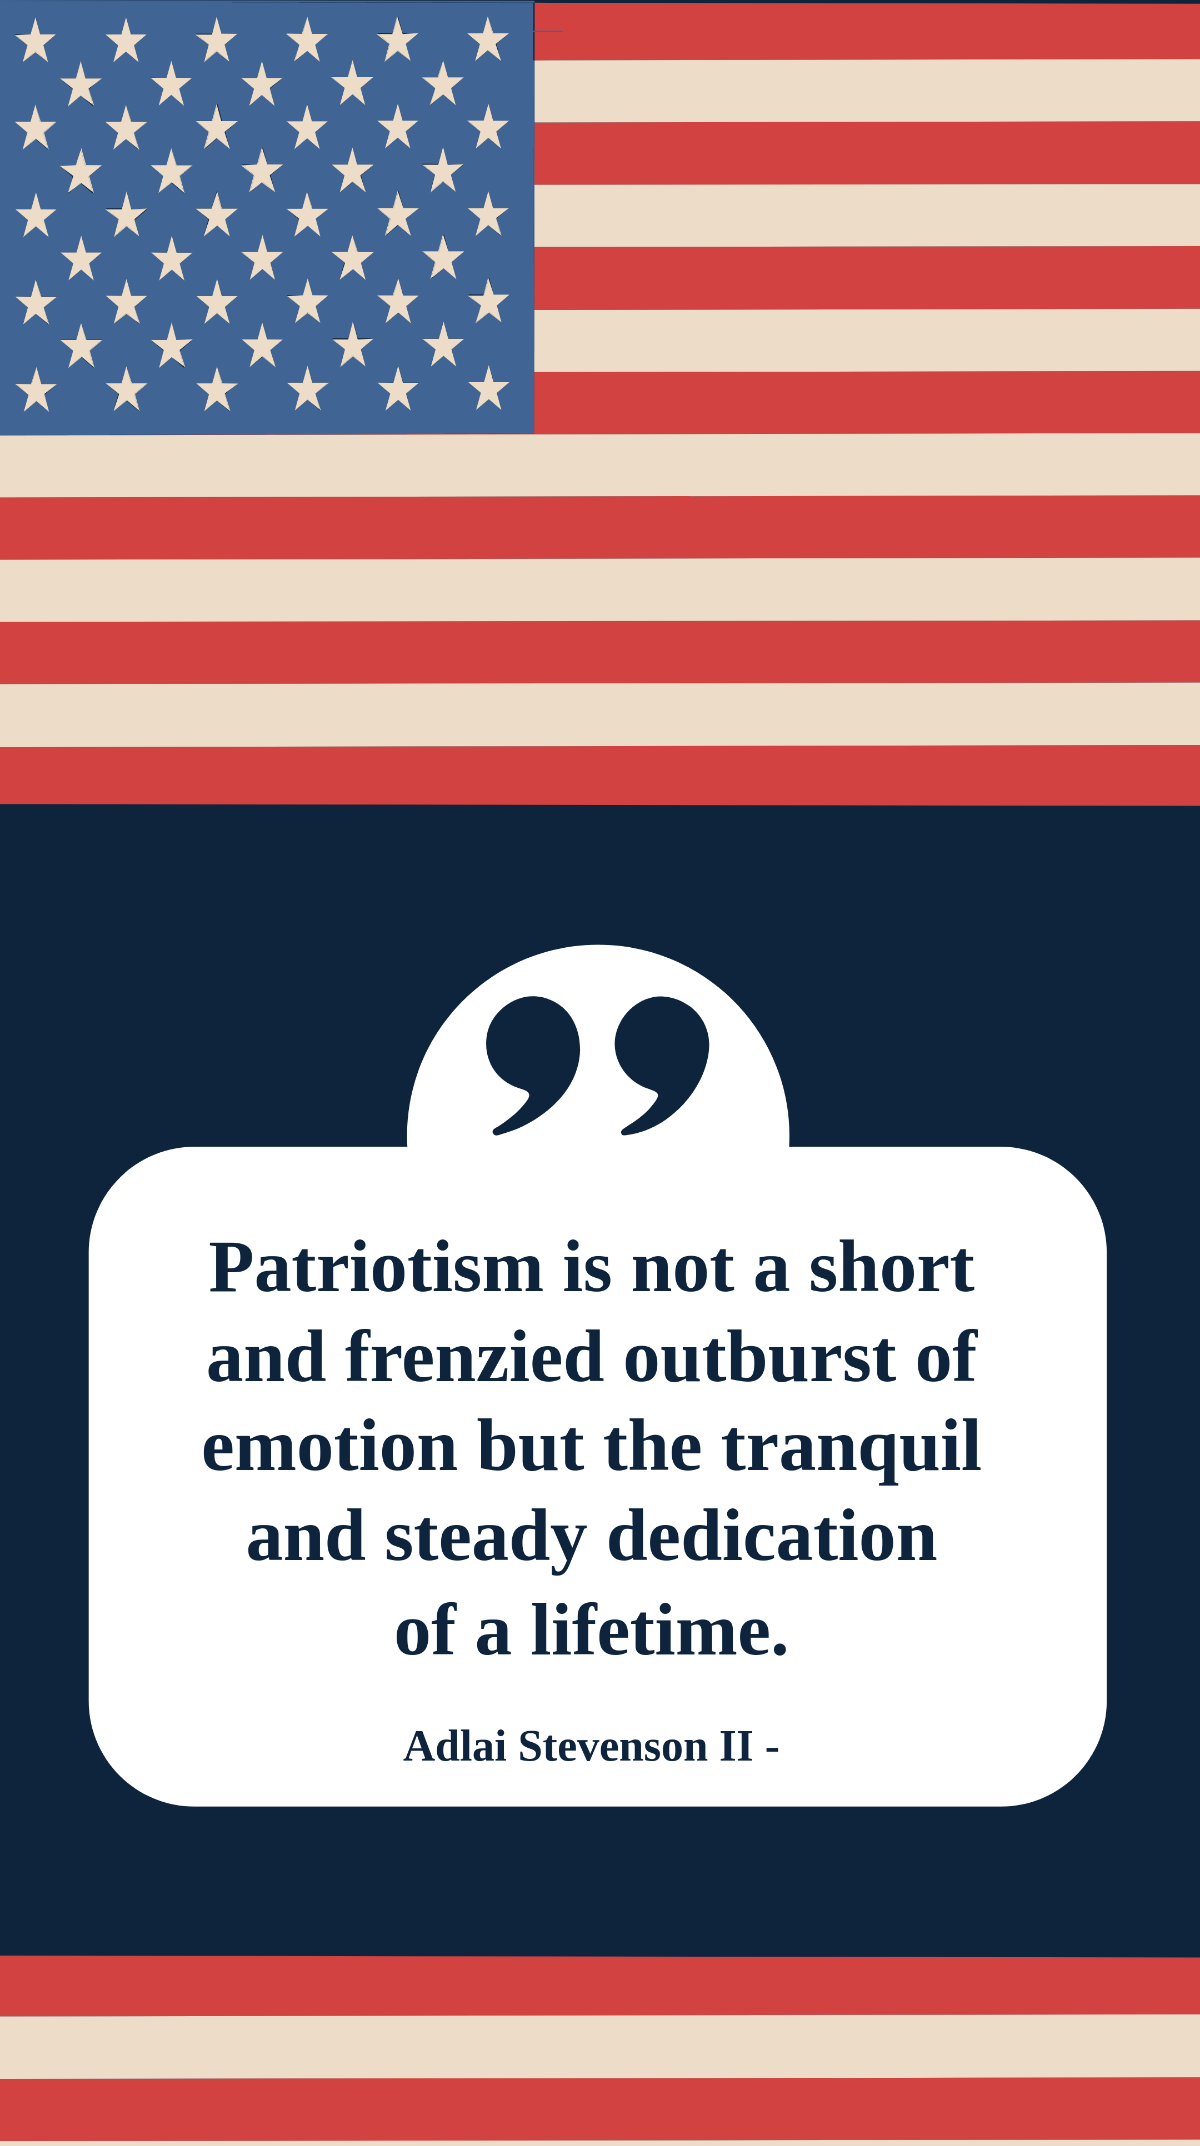 Adlai Stevenson II - Patriotism is not a short and frenzied outburst of emotion but the tranquil and steady dedication of a lifetime. Template